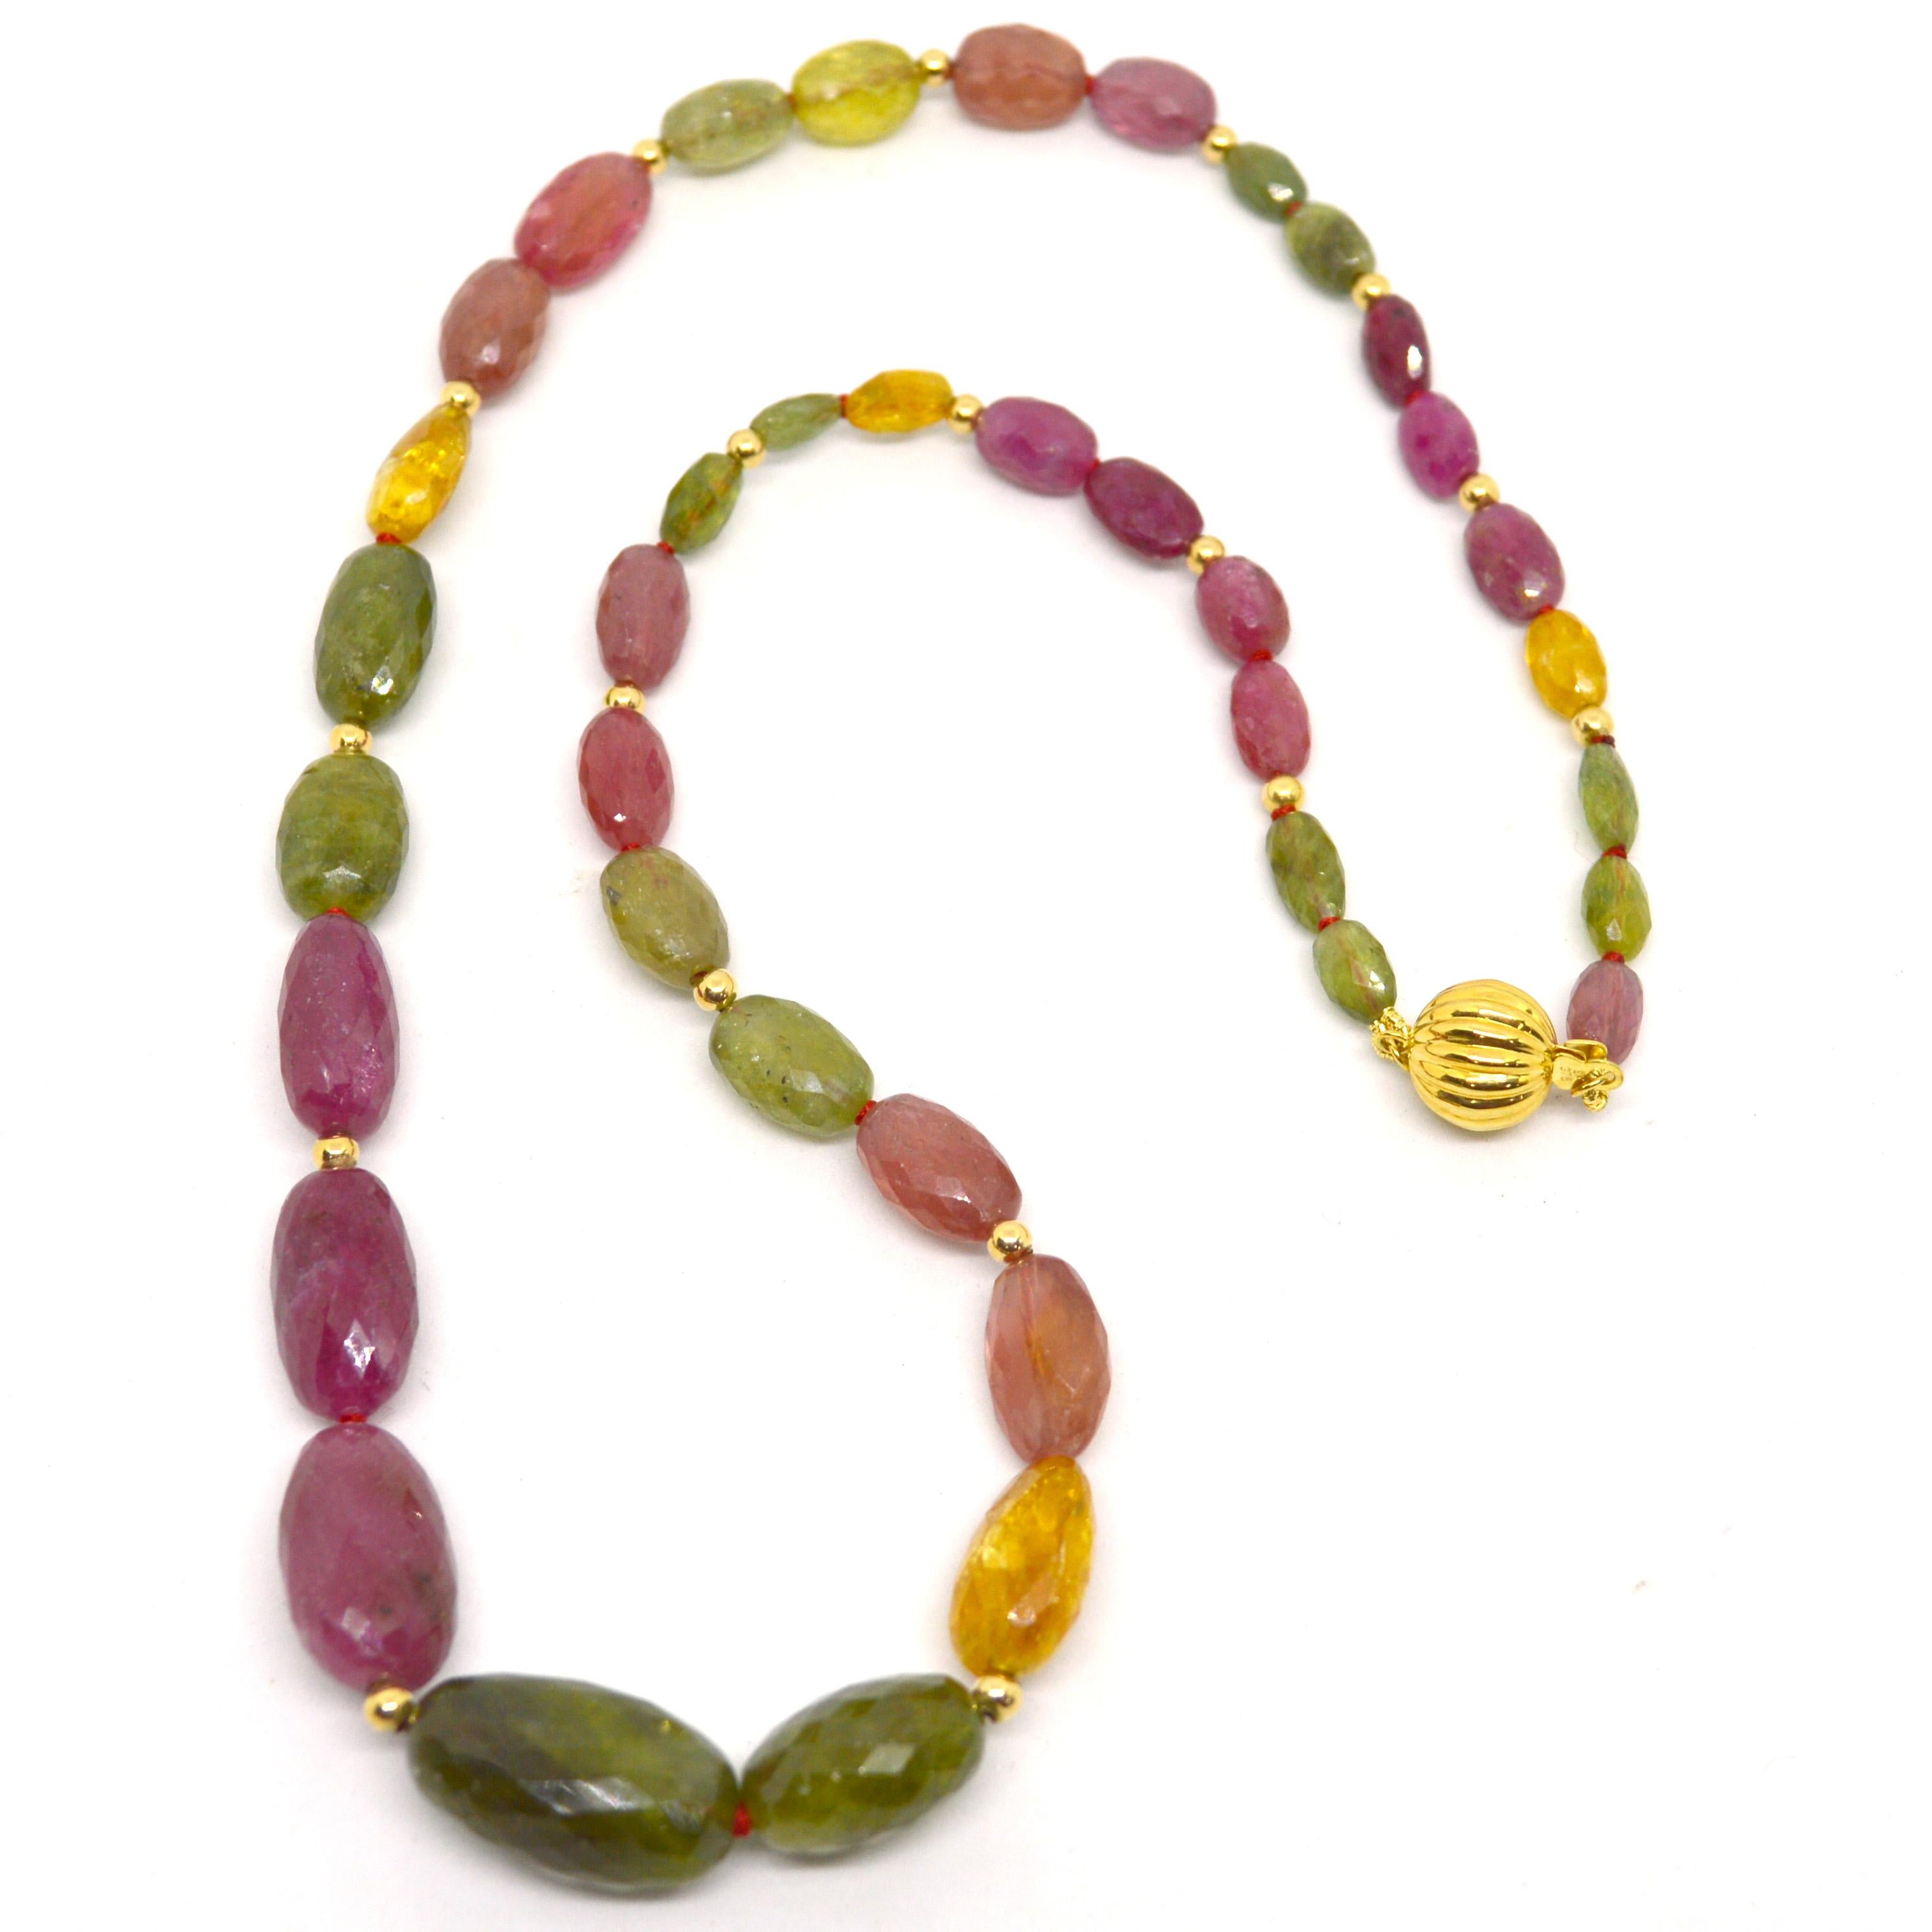 Vibrant multicoloured Sapphire faceted beaded necklace with 14k Gold spacer beads and a 9k gold clasp.

Total length of necklace 52cm /20.4 inches.

